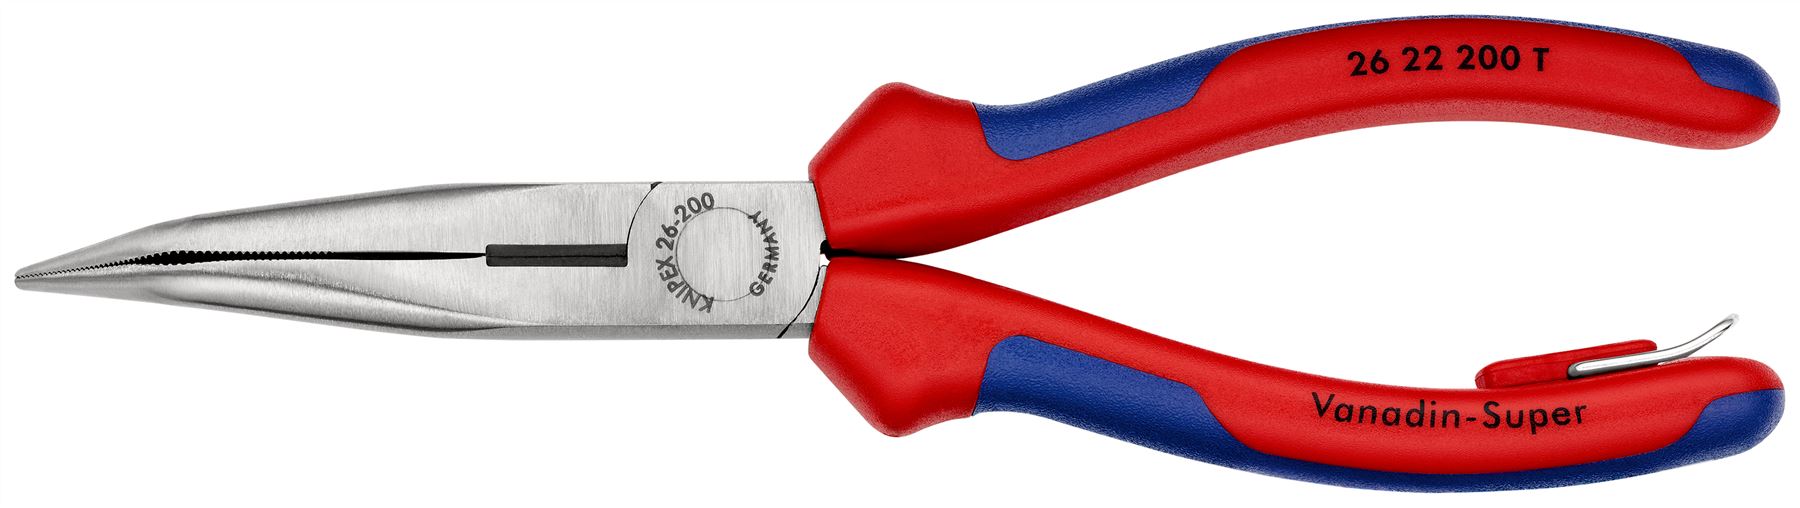 Knipex Snipe Nose Side Cutting Pliers 40° Bend 200mm Multi Component Grips with Tether Point 26 22 200 T